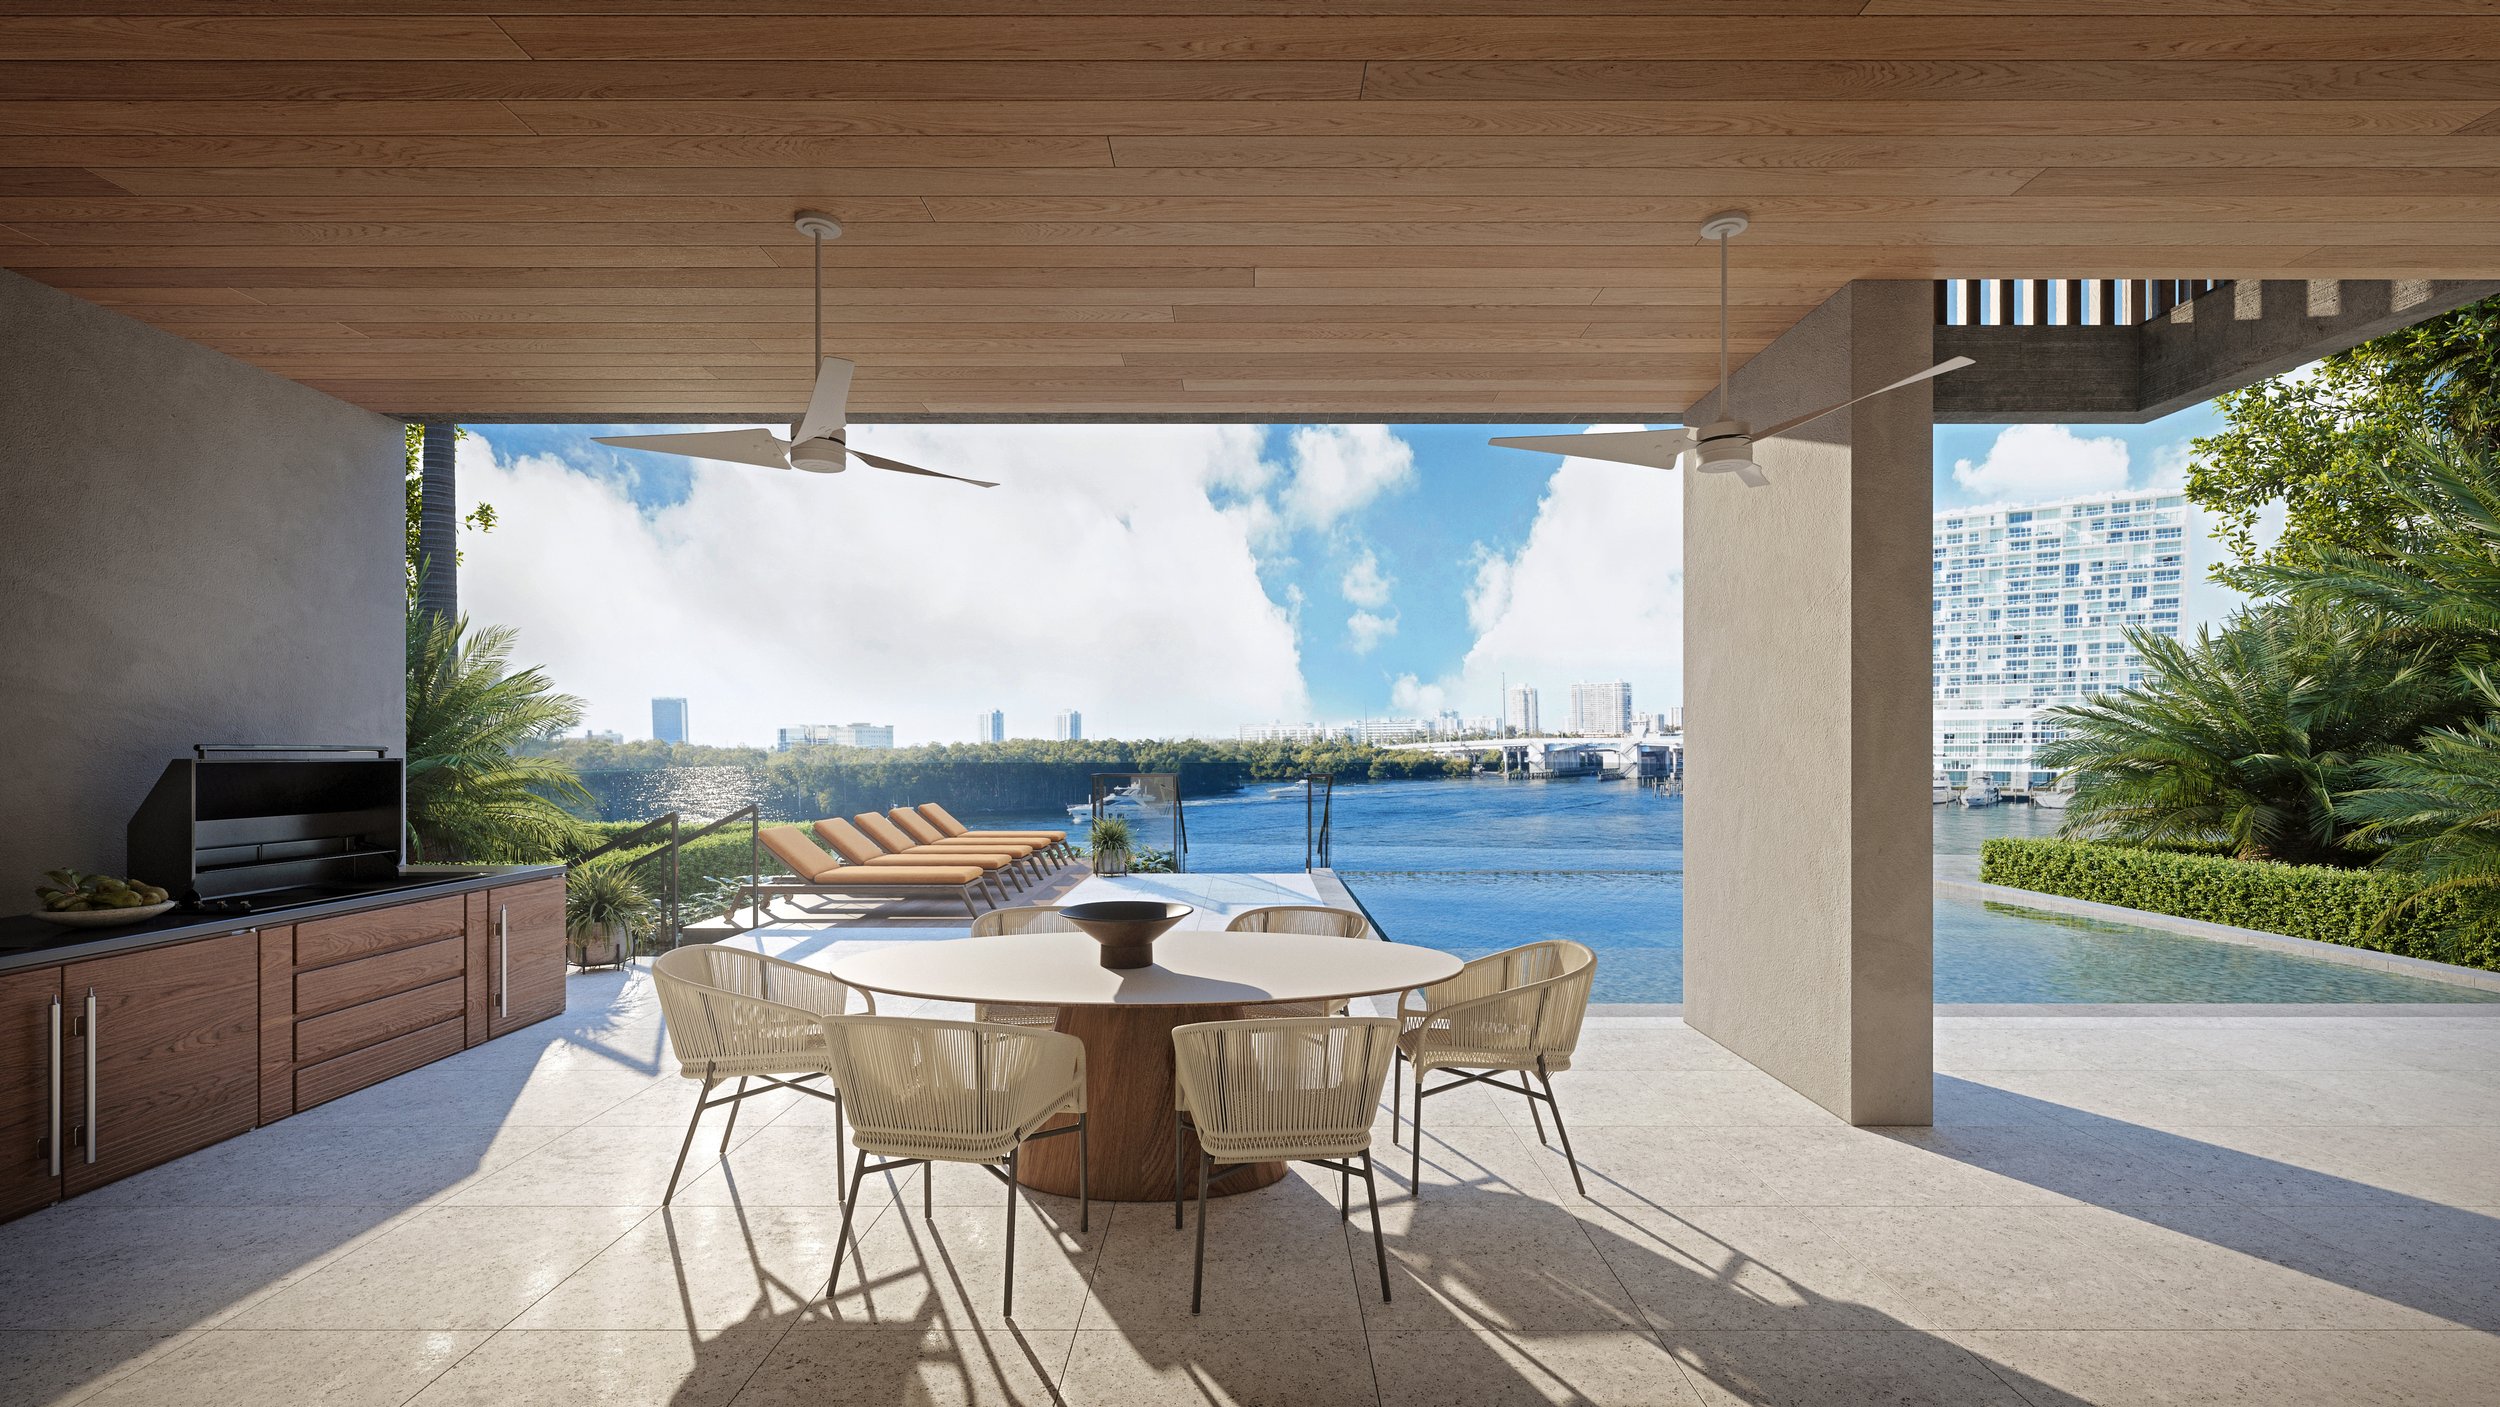 David Development Reveals Calil Architects-Designed Waterfront Spec Home In Sunny Isles Beach 4.jpg